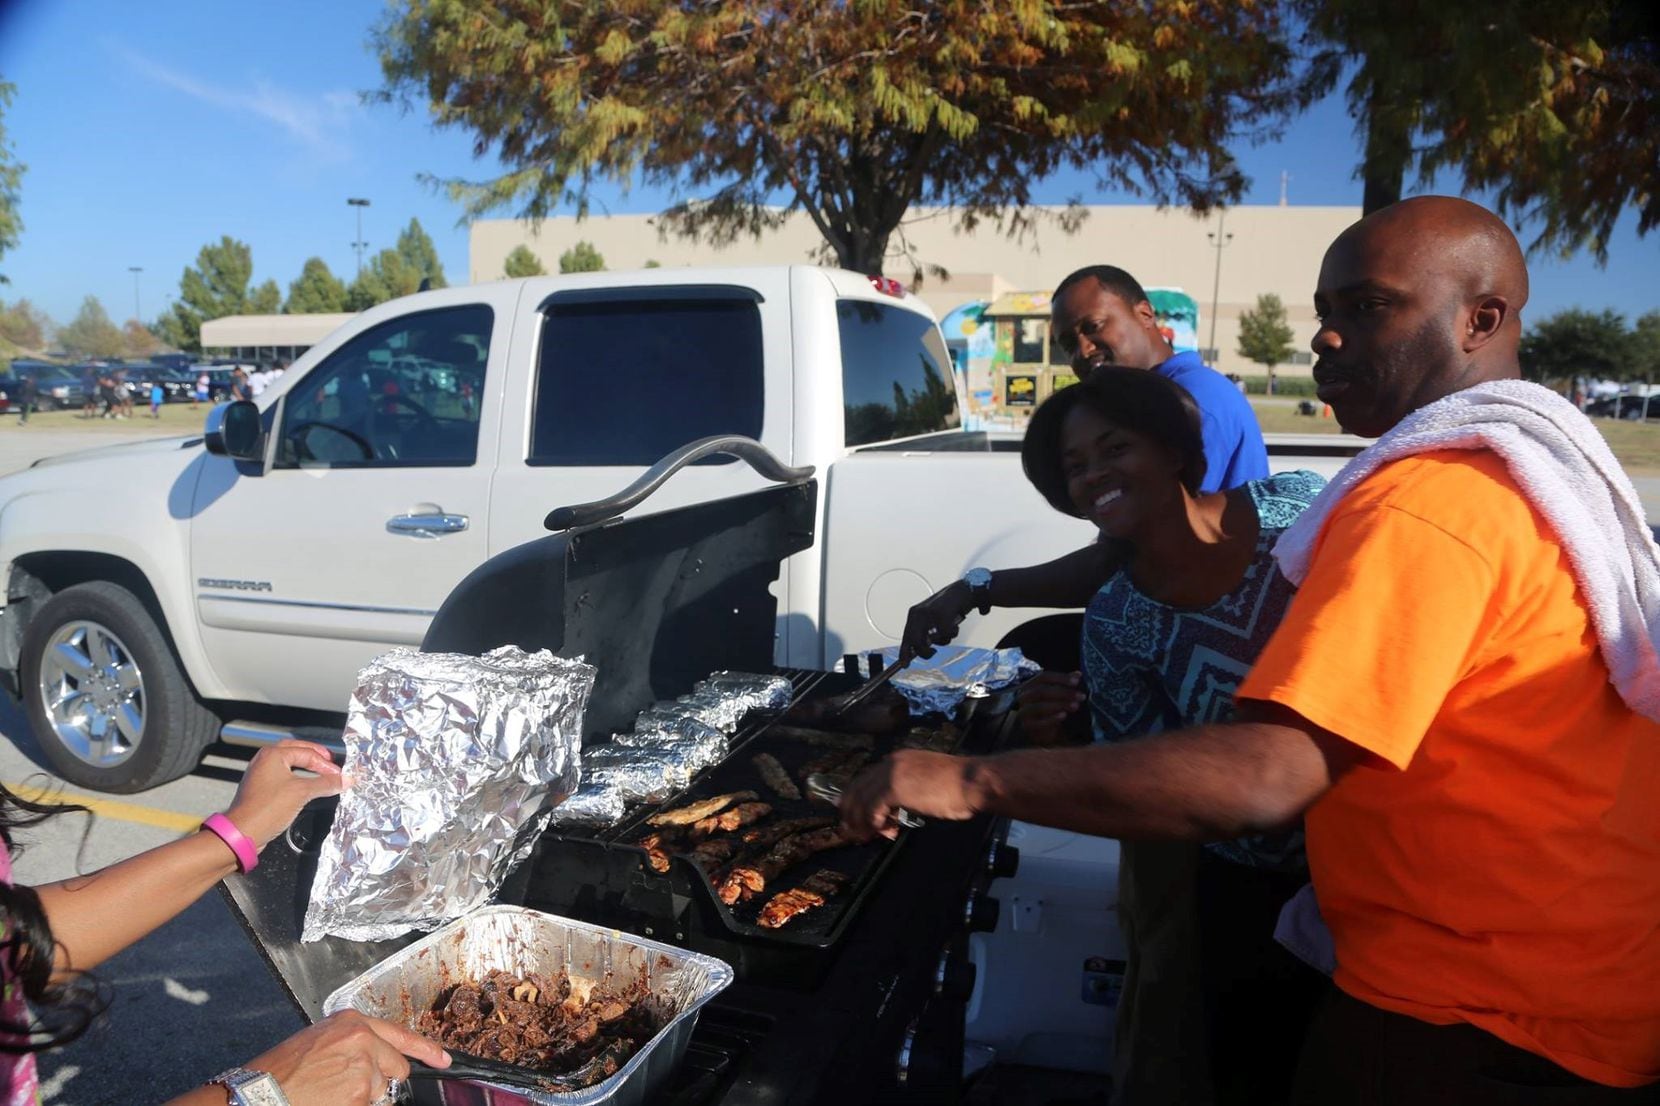 The Full Gospel Holy Temple Church in South Dallas has a habit of serving Sunday meals, called Dinner on the Ground.